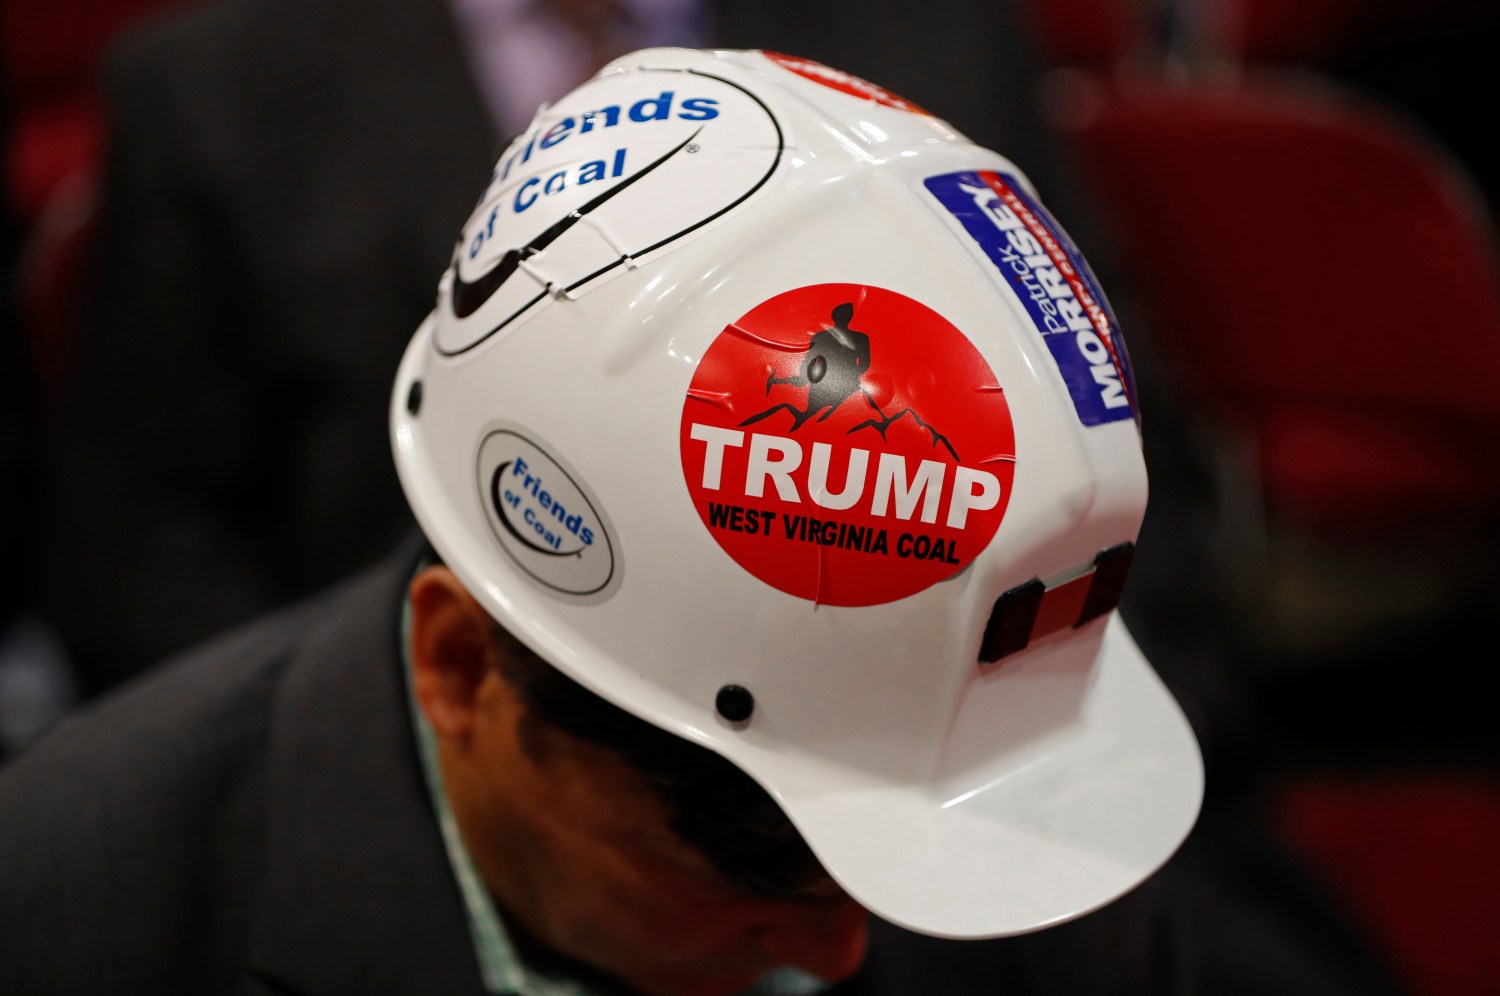 A West Virginia delegate wears a Trump sticker on his hard hat during the second day of the Republican National Convention in Cleveland, Ohio, U.S. July 19, 2016. REUTERS/Aaron P. Bernstein - RTSIREH